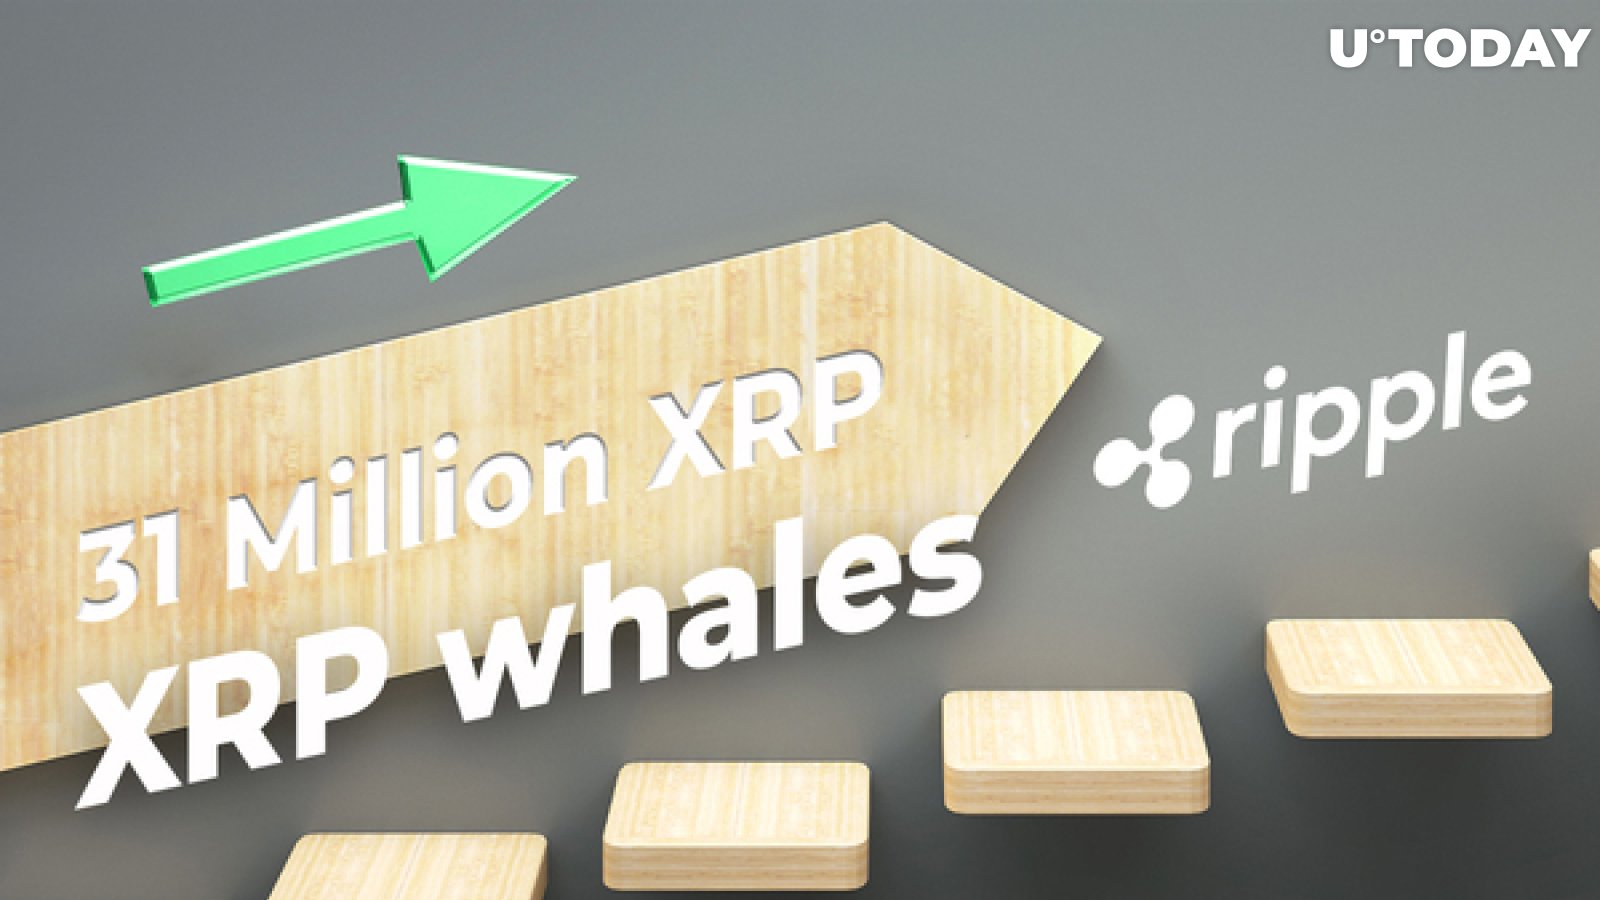 Ripple Helps Move 31 Million XRP, While Number of XRP Whales Soars in Q1 